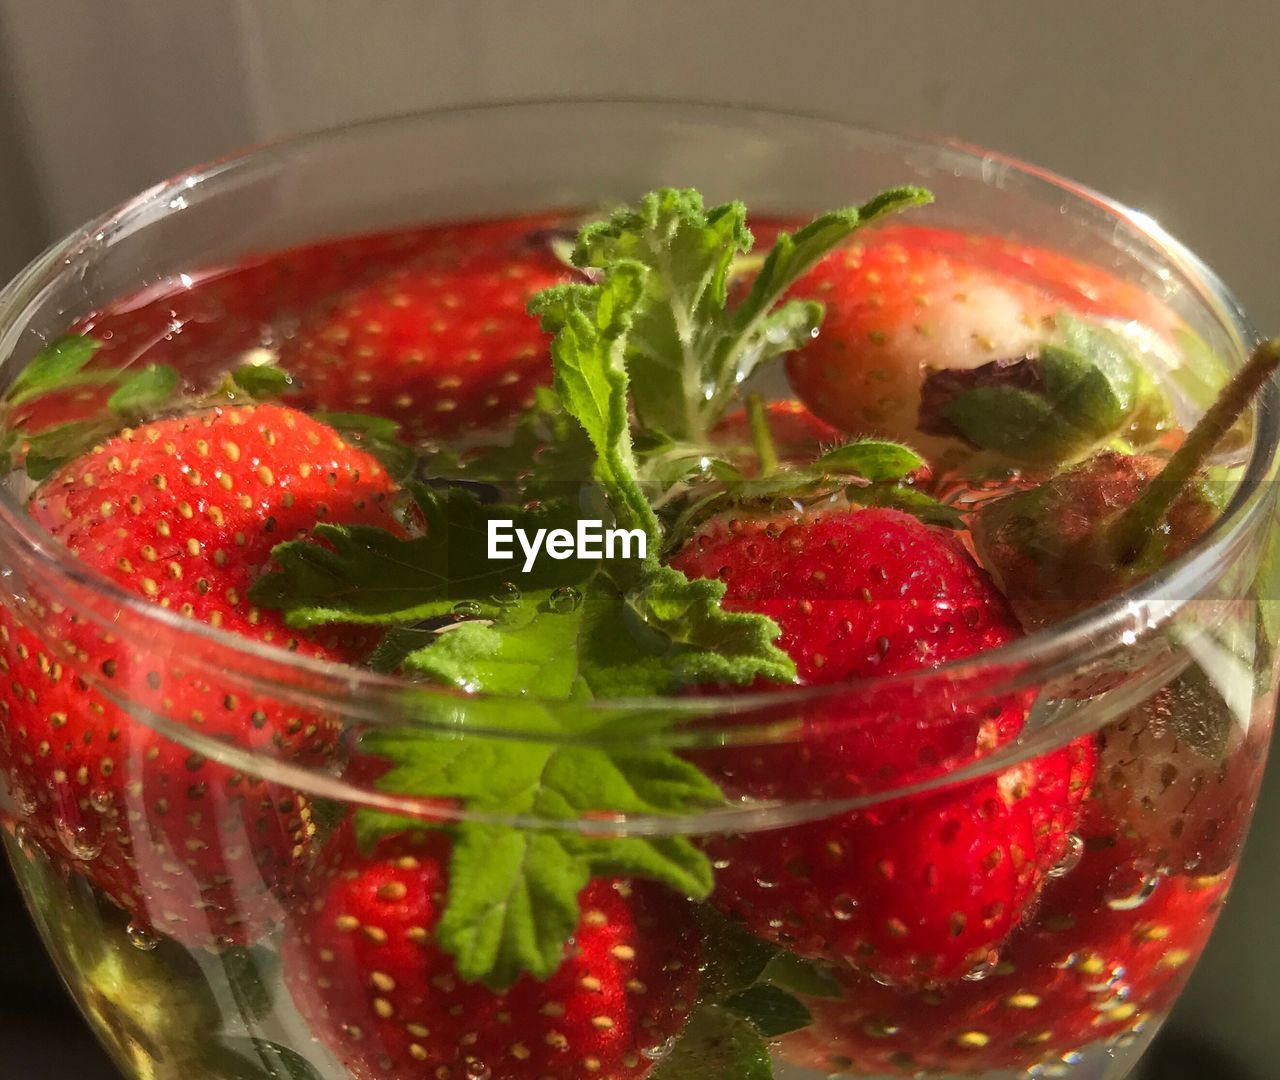 CLOSE-UP OF FRESH STRAWBERRIES IN WATER